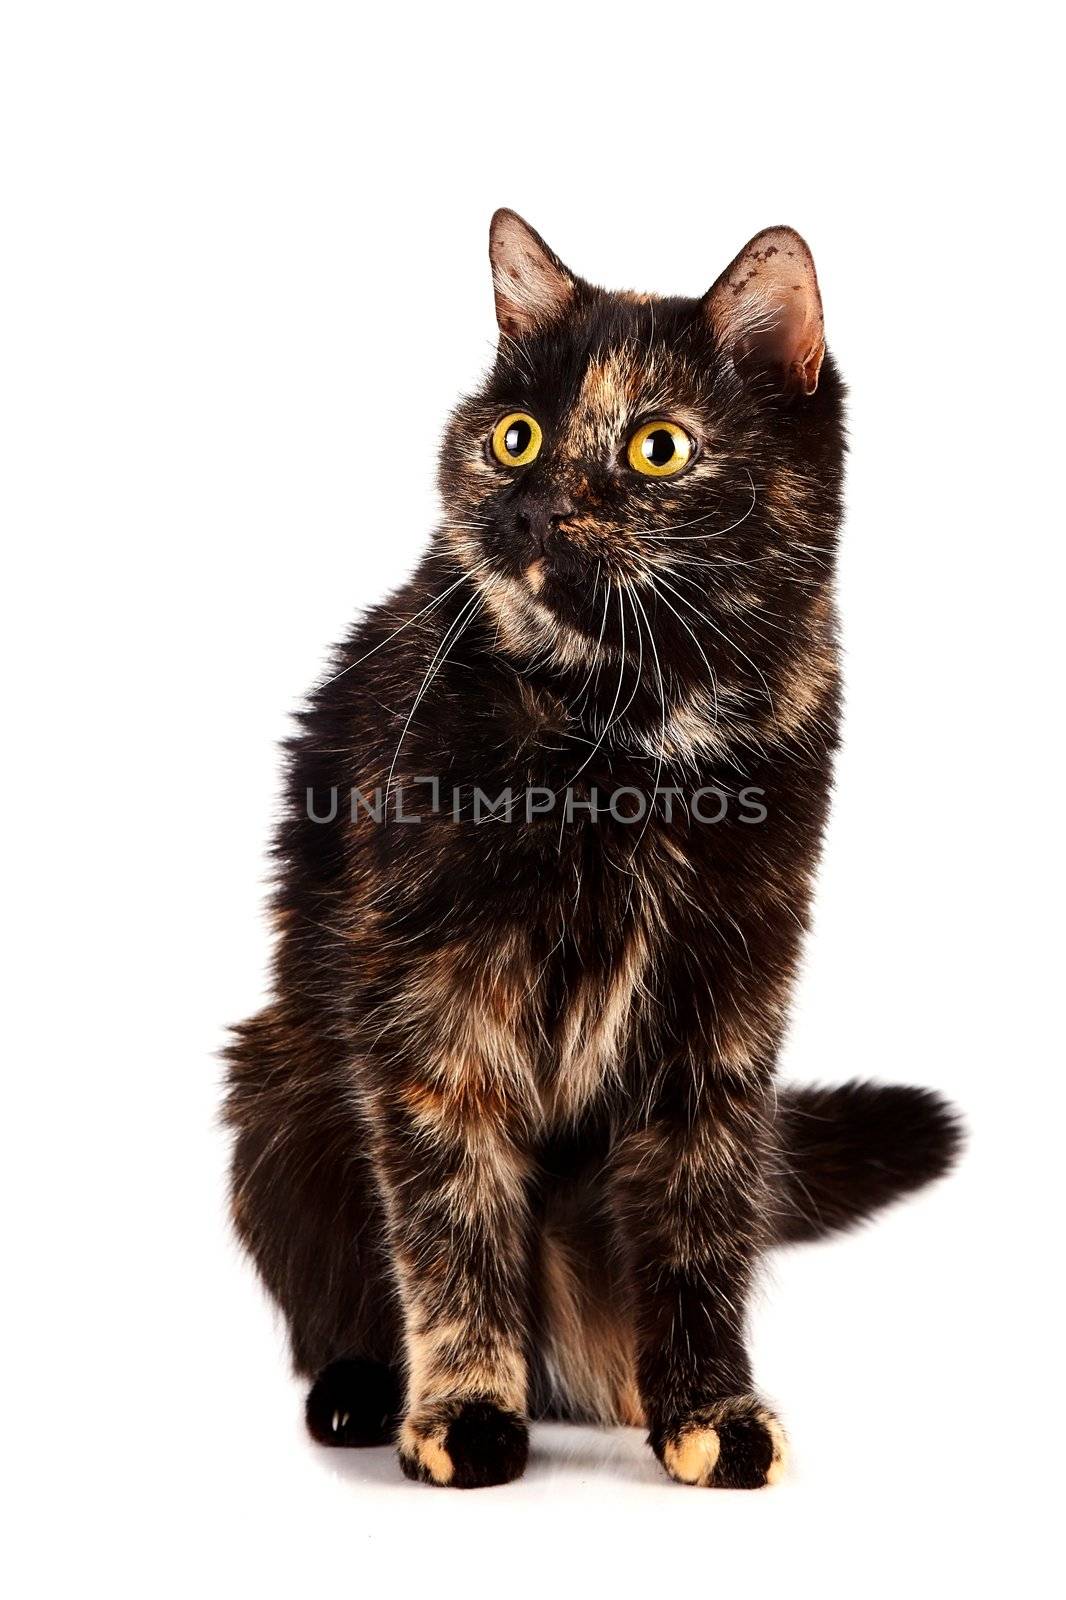 The cat sits on a white background